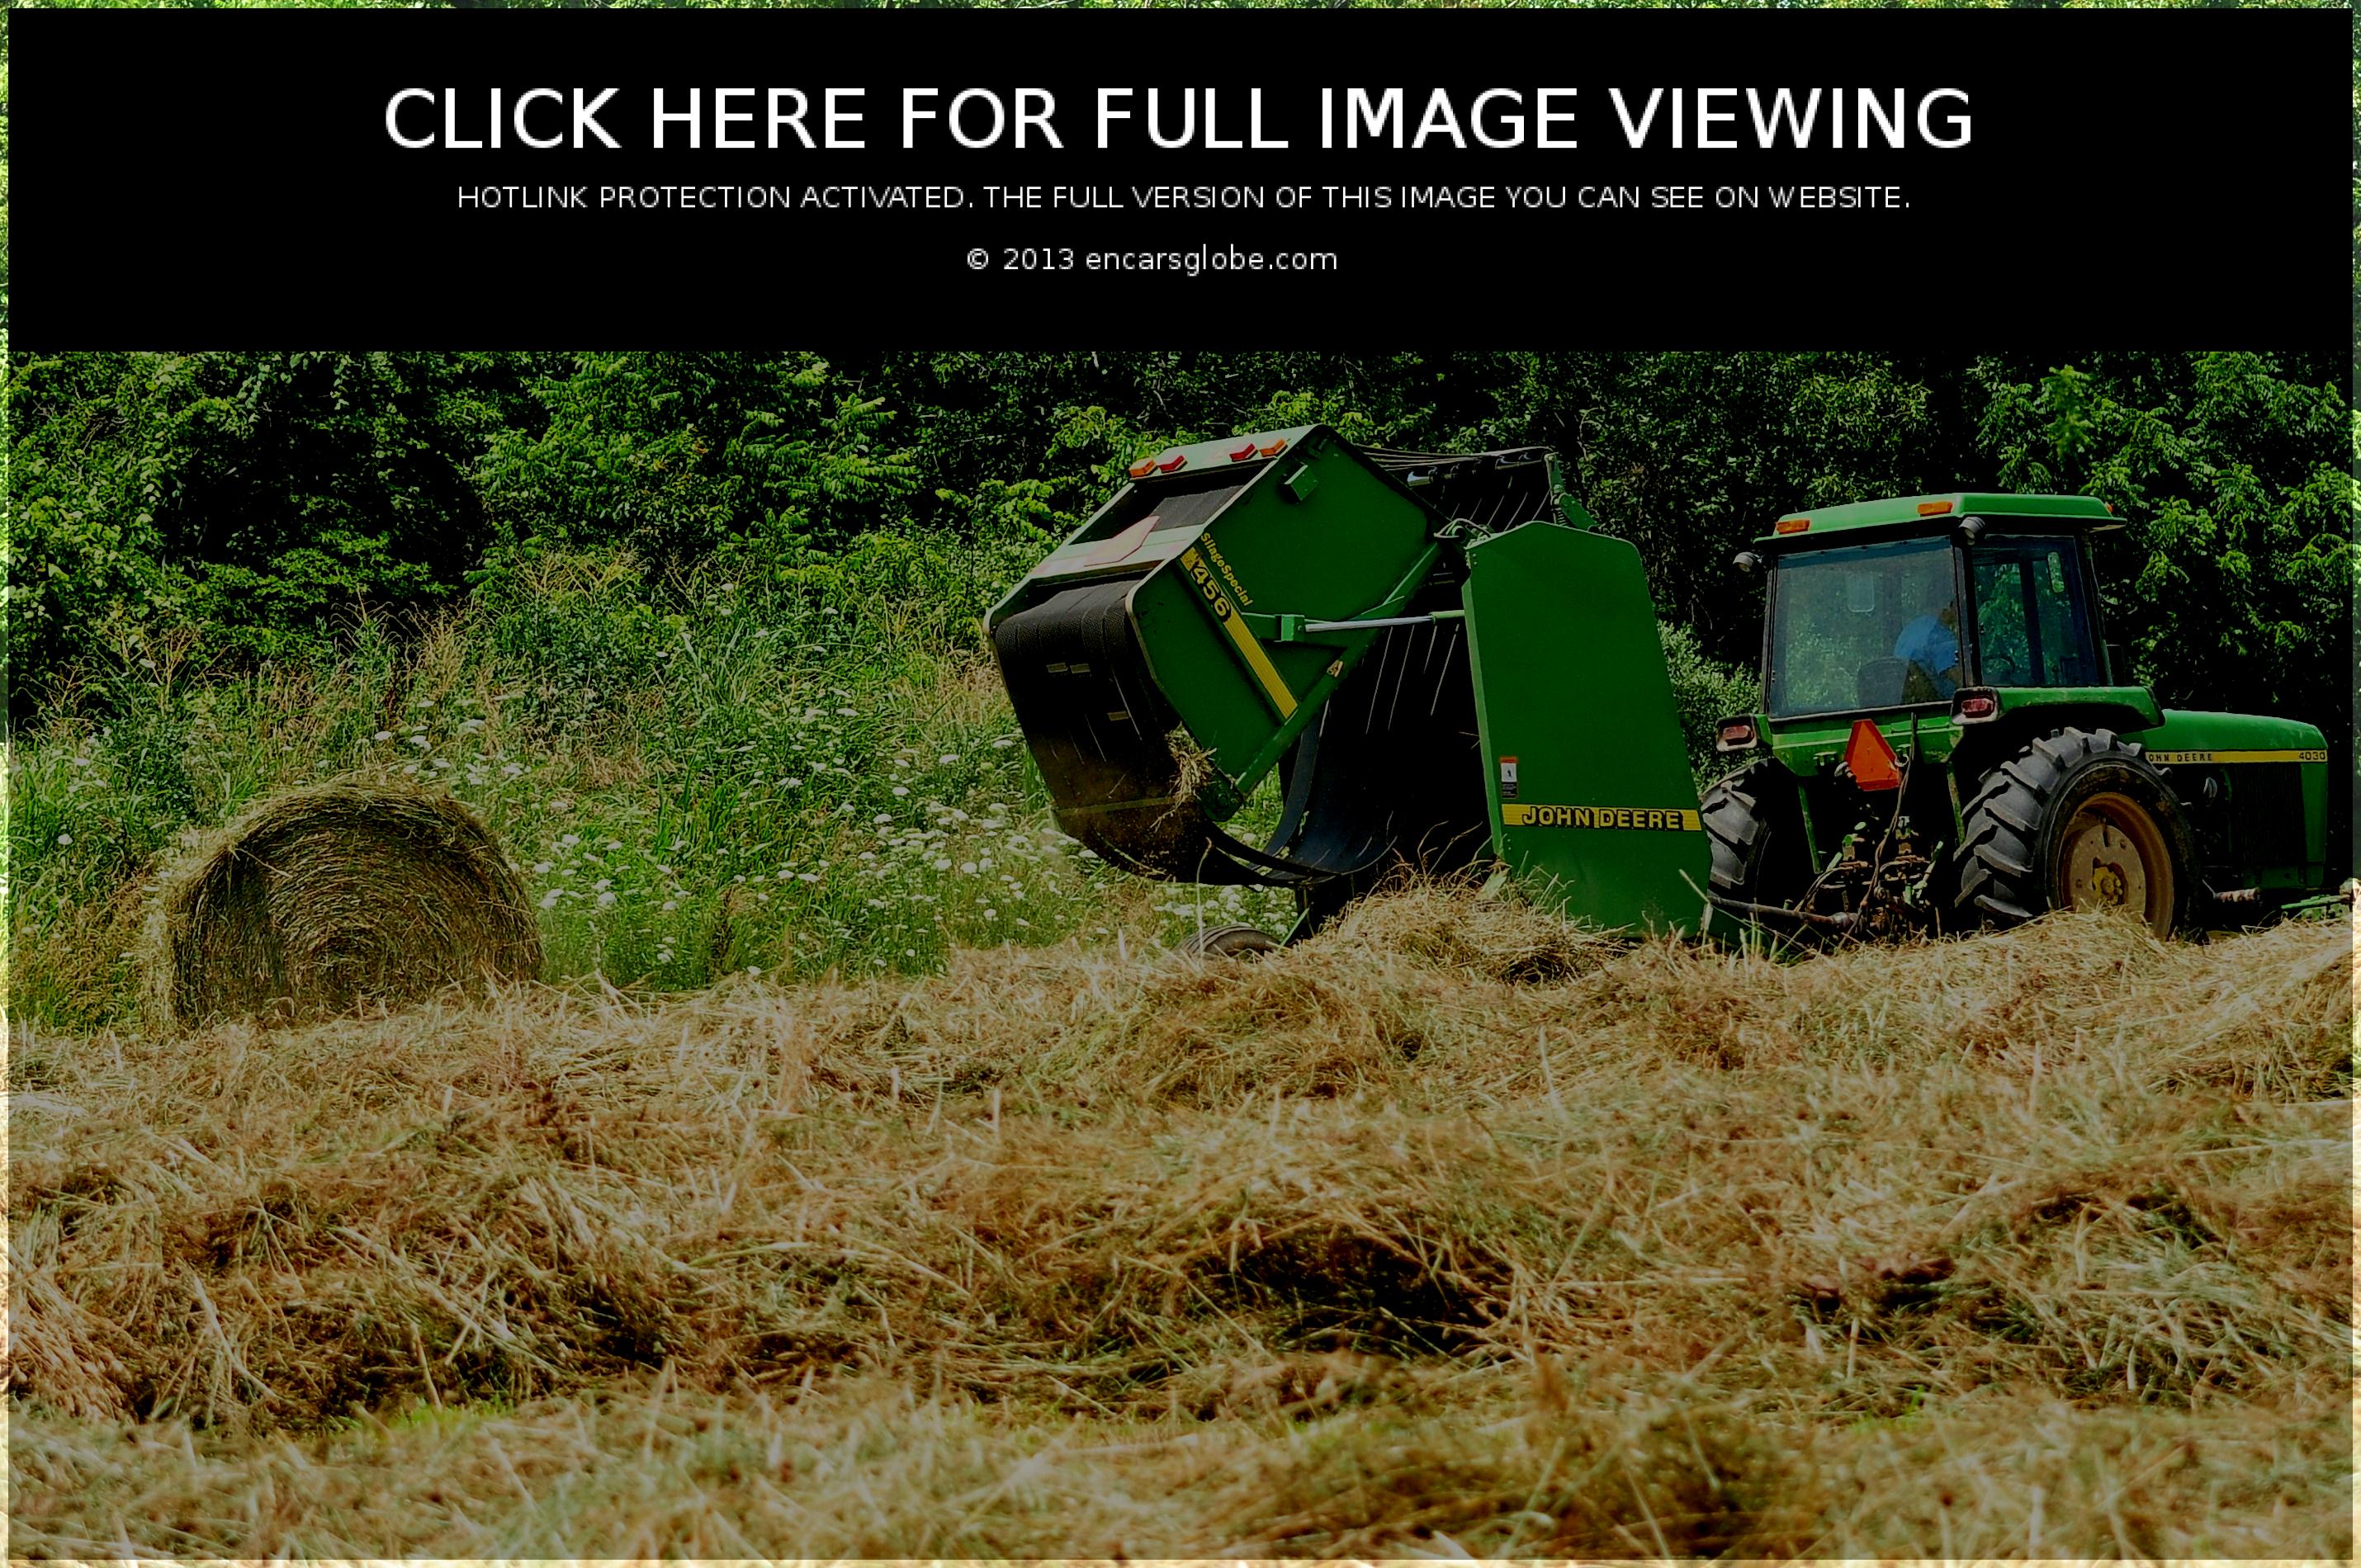 John Deere 4030 Photo Gallery: Photo #12 out of 12, Image Size ...